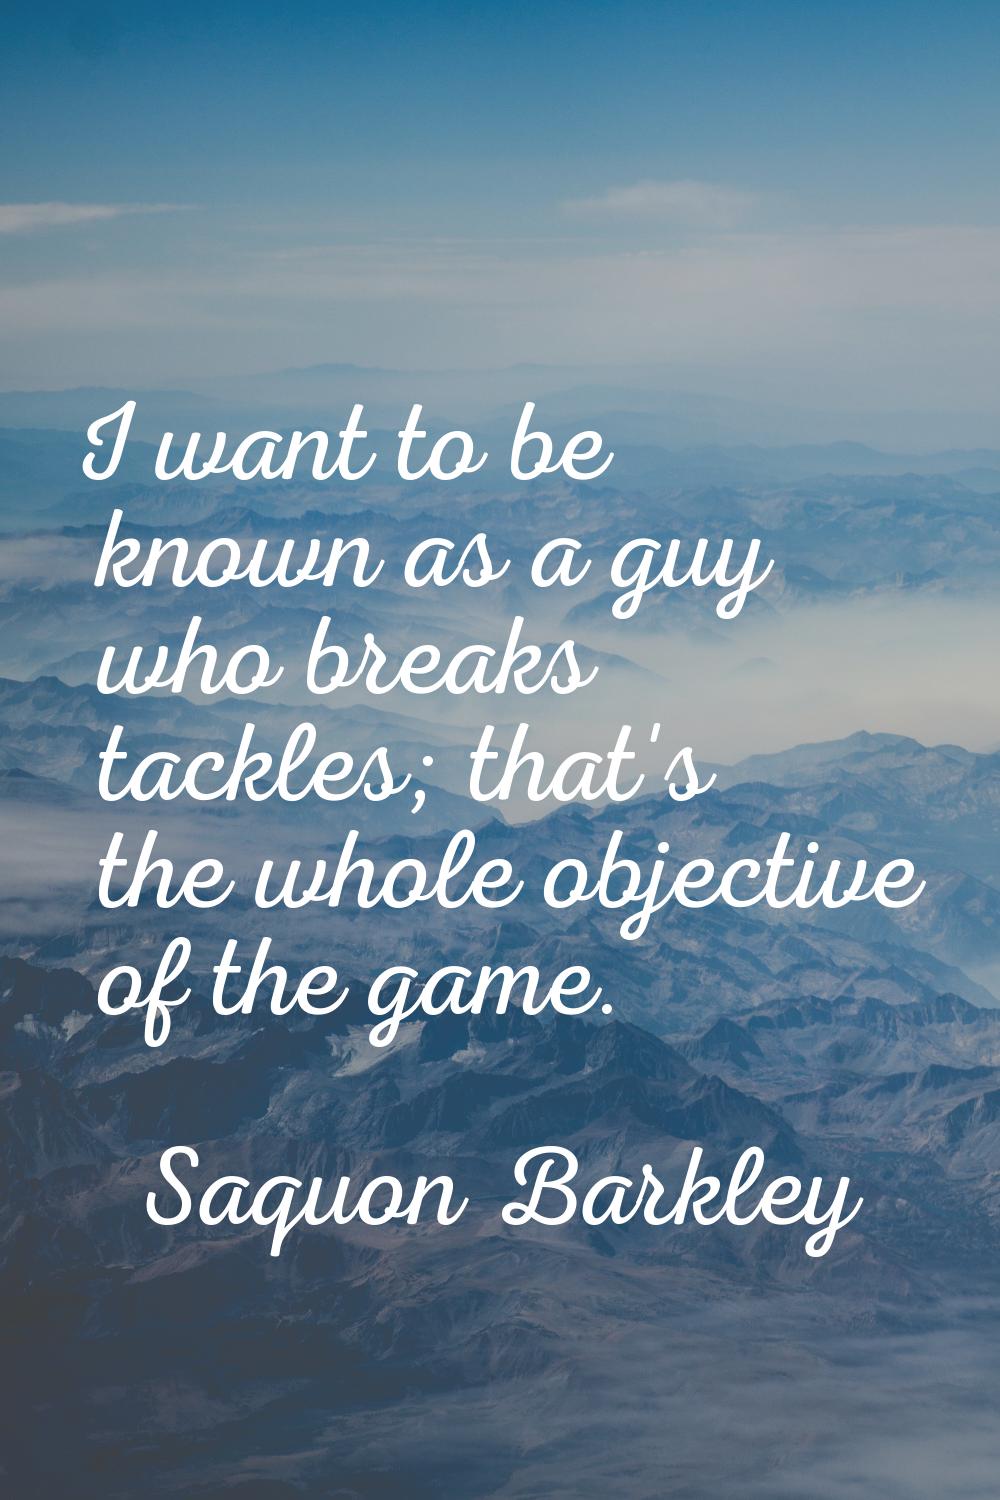 I want to be known as a guy who breaks tackles; that's the whole objective of the game.